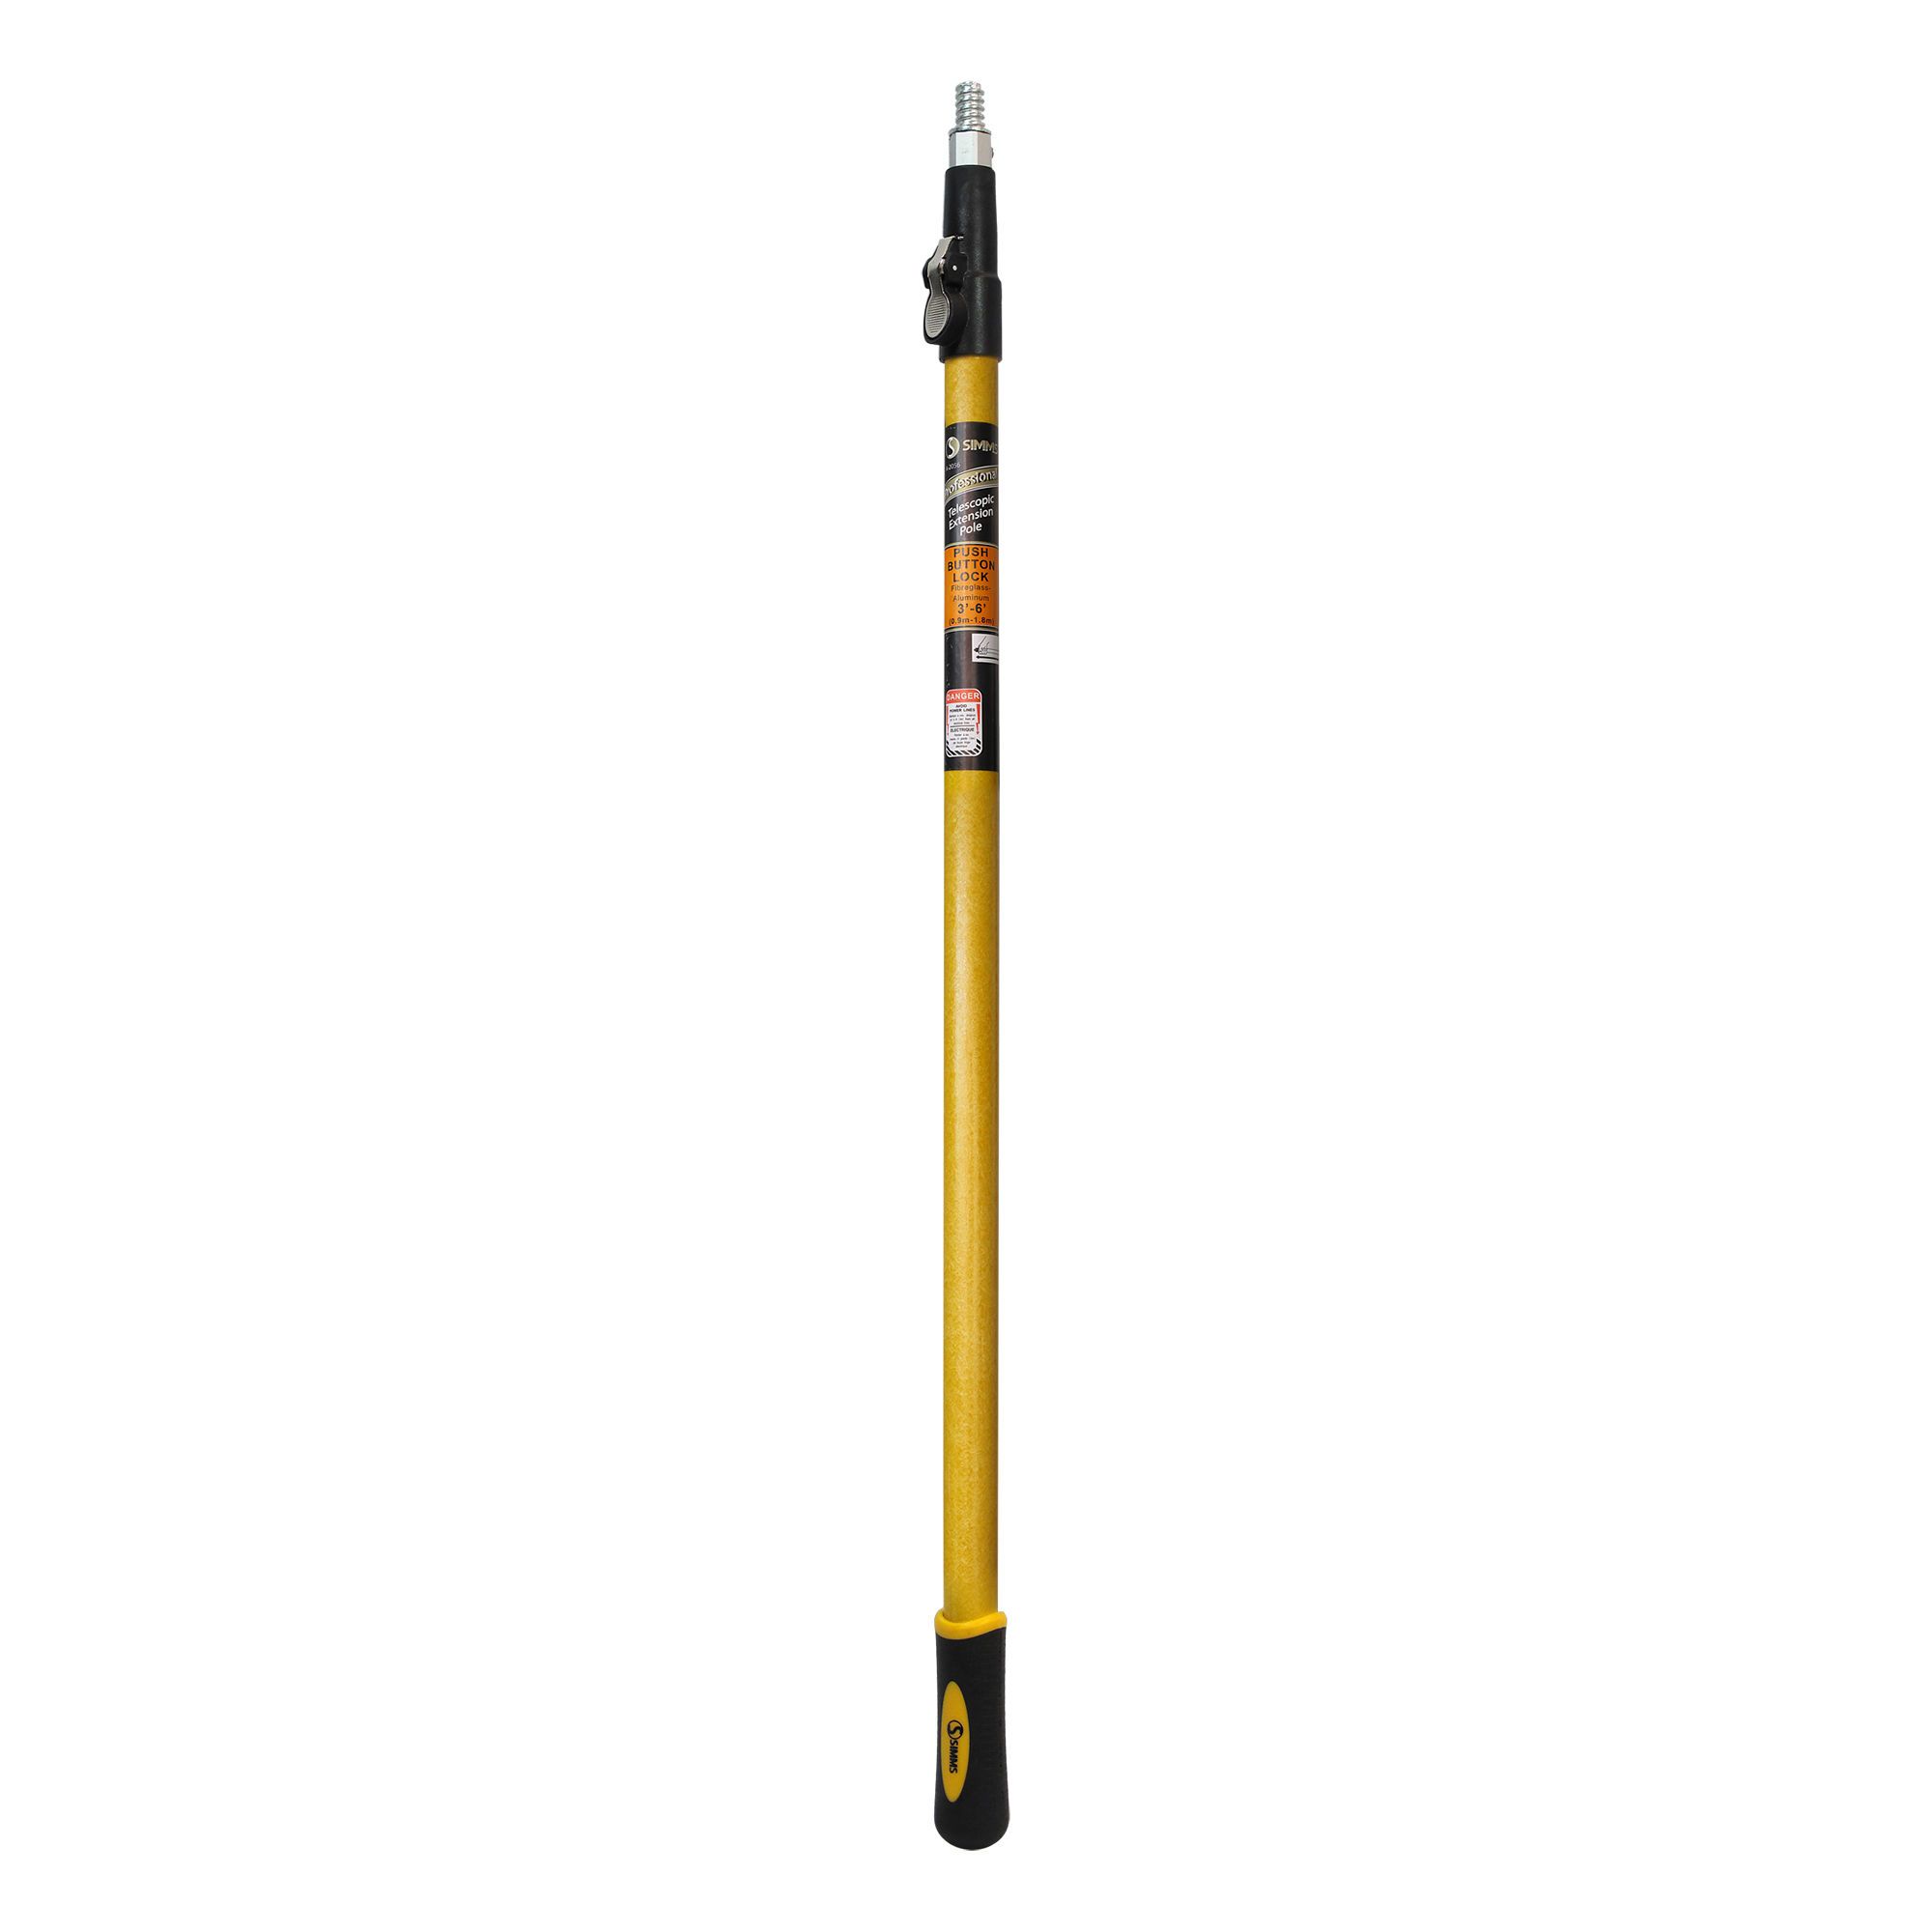 Telescopic Extension Pole - 3 - 6' from T.S. SIMMS & CIE